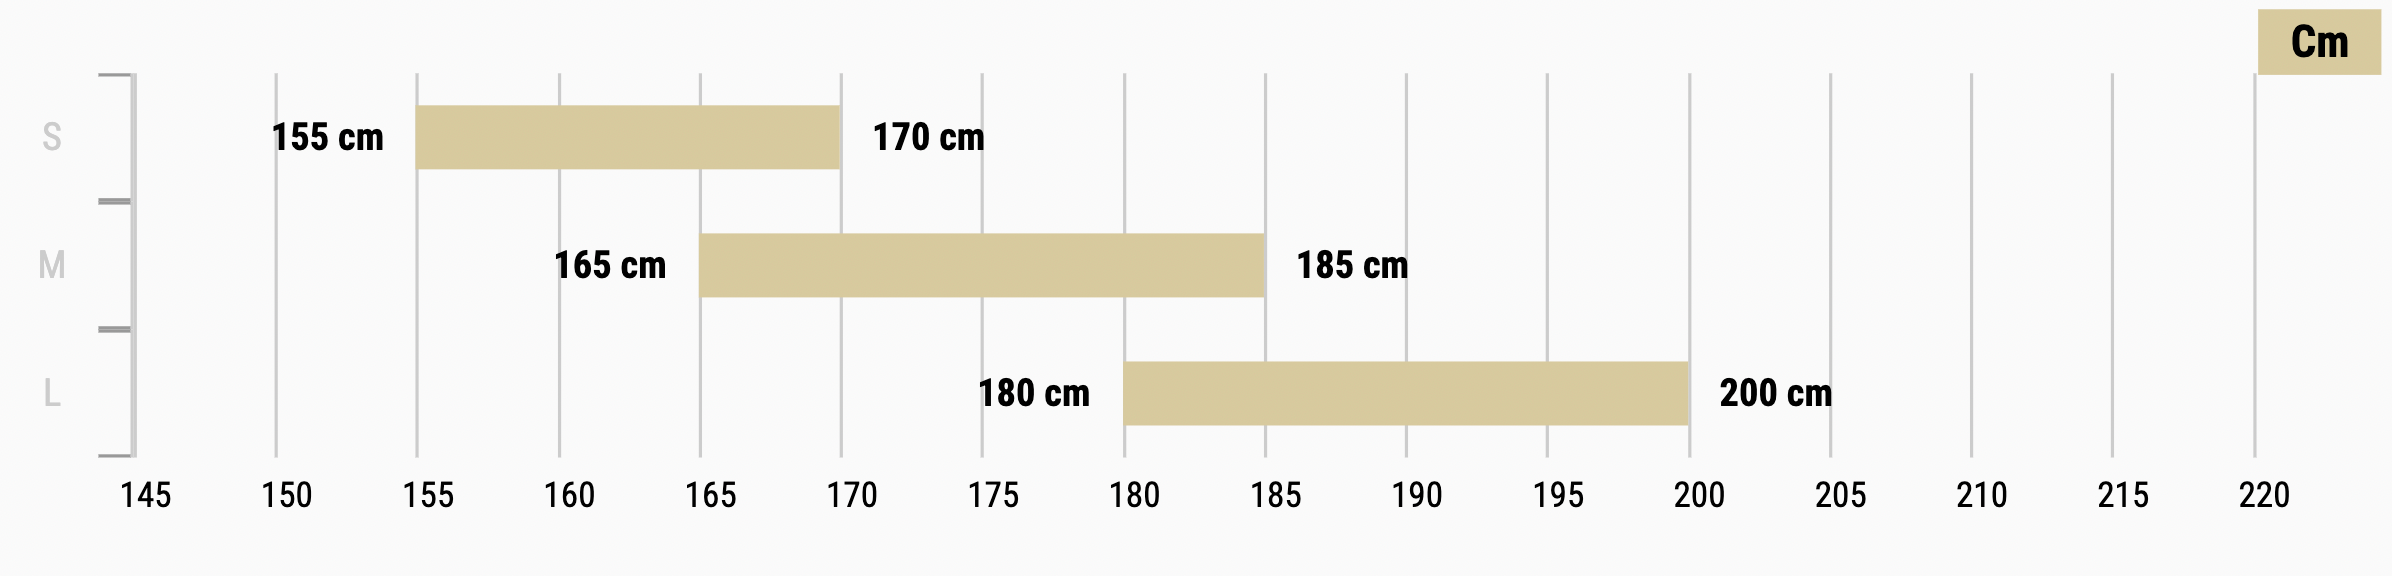 Commencal Absolut Size Chart